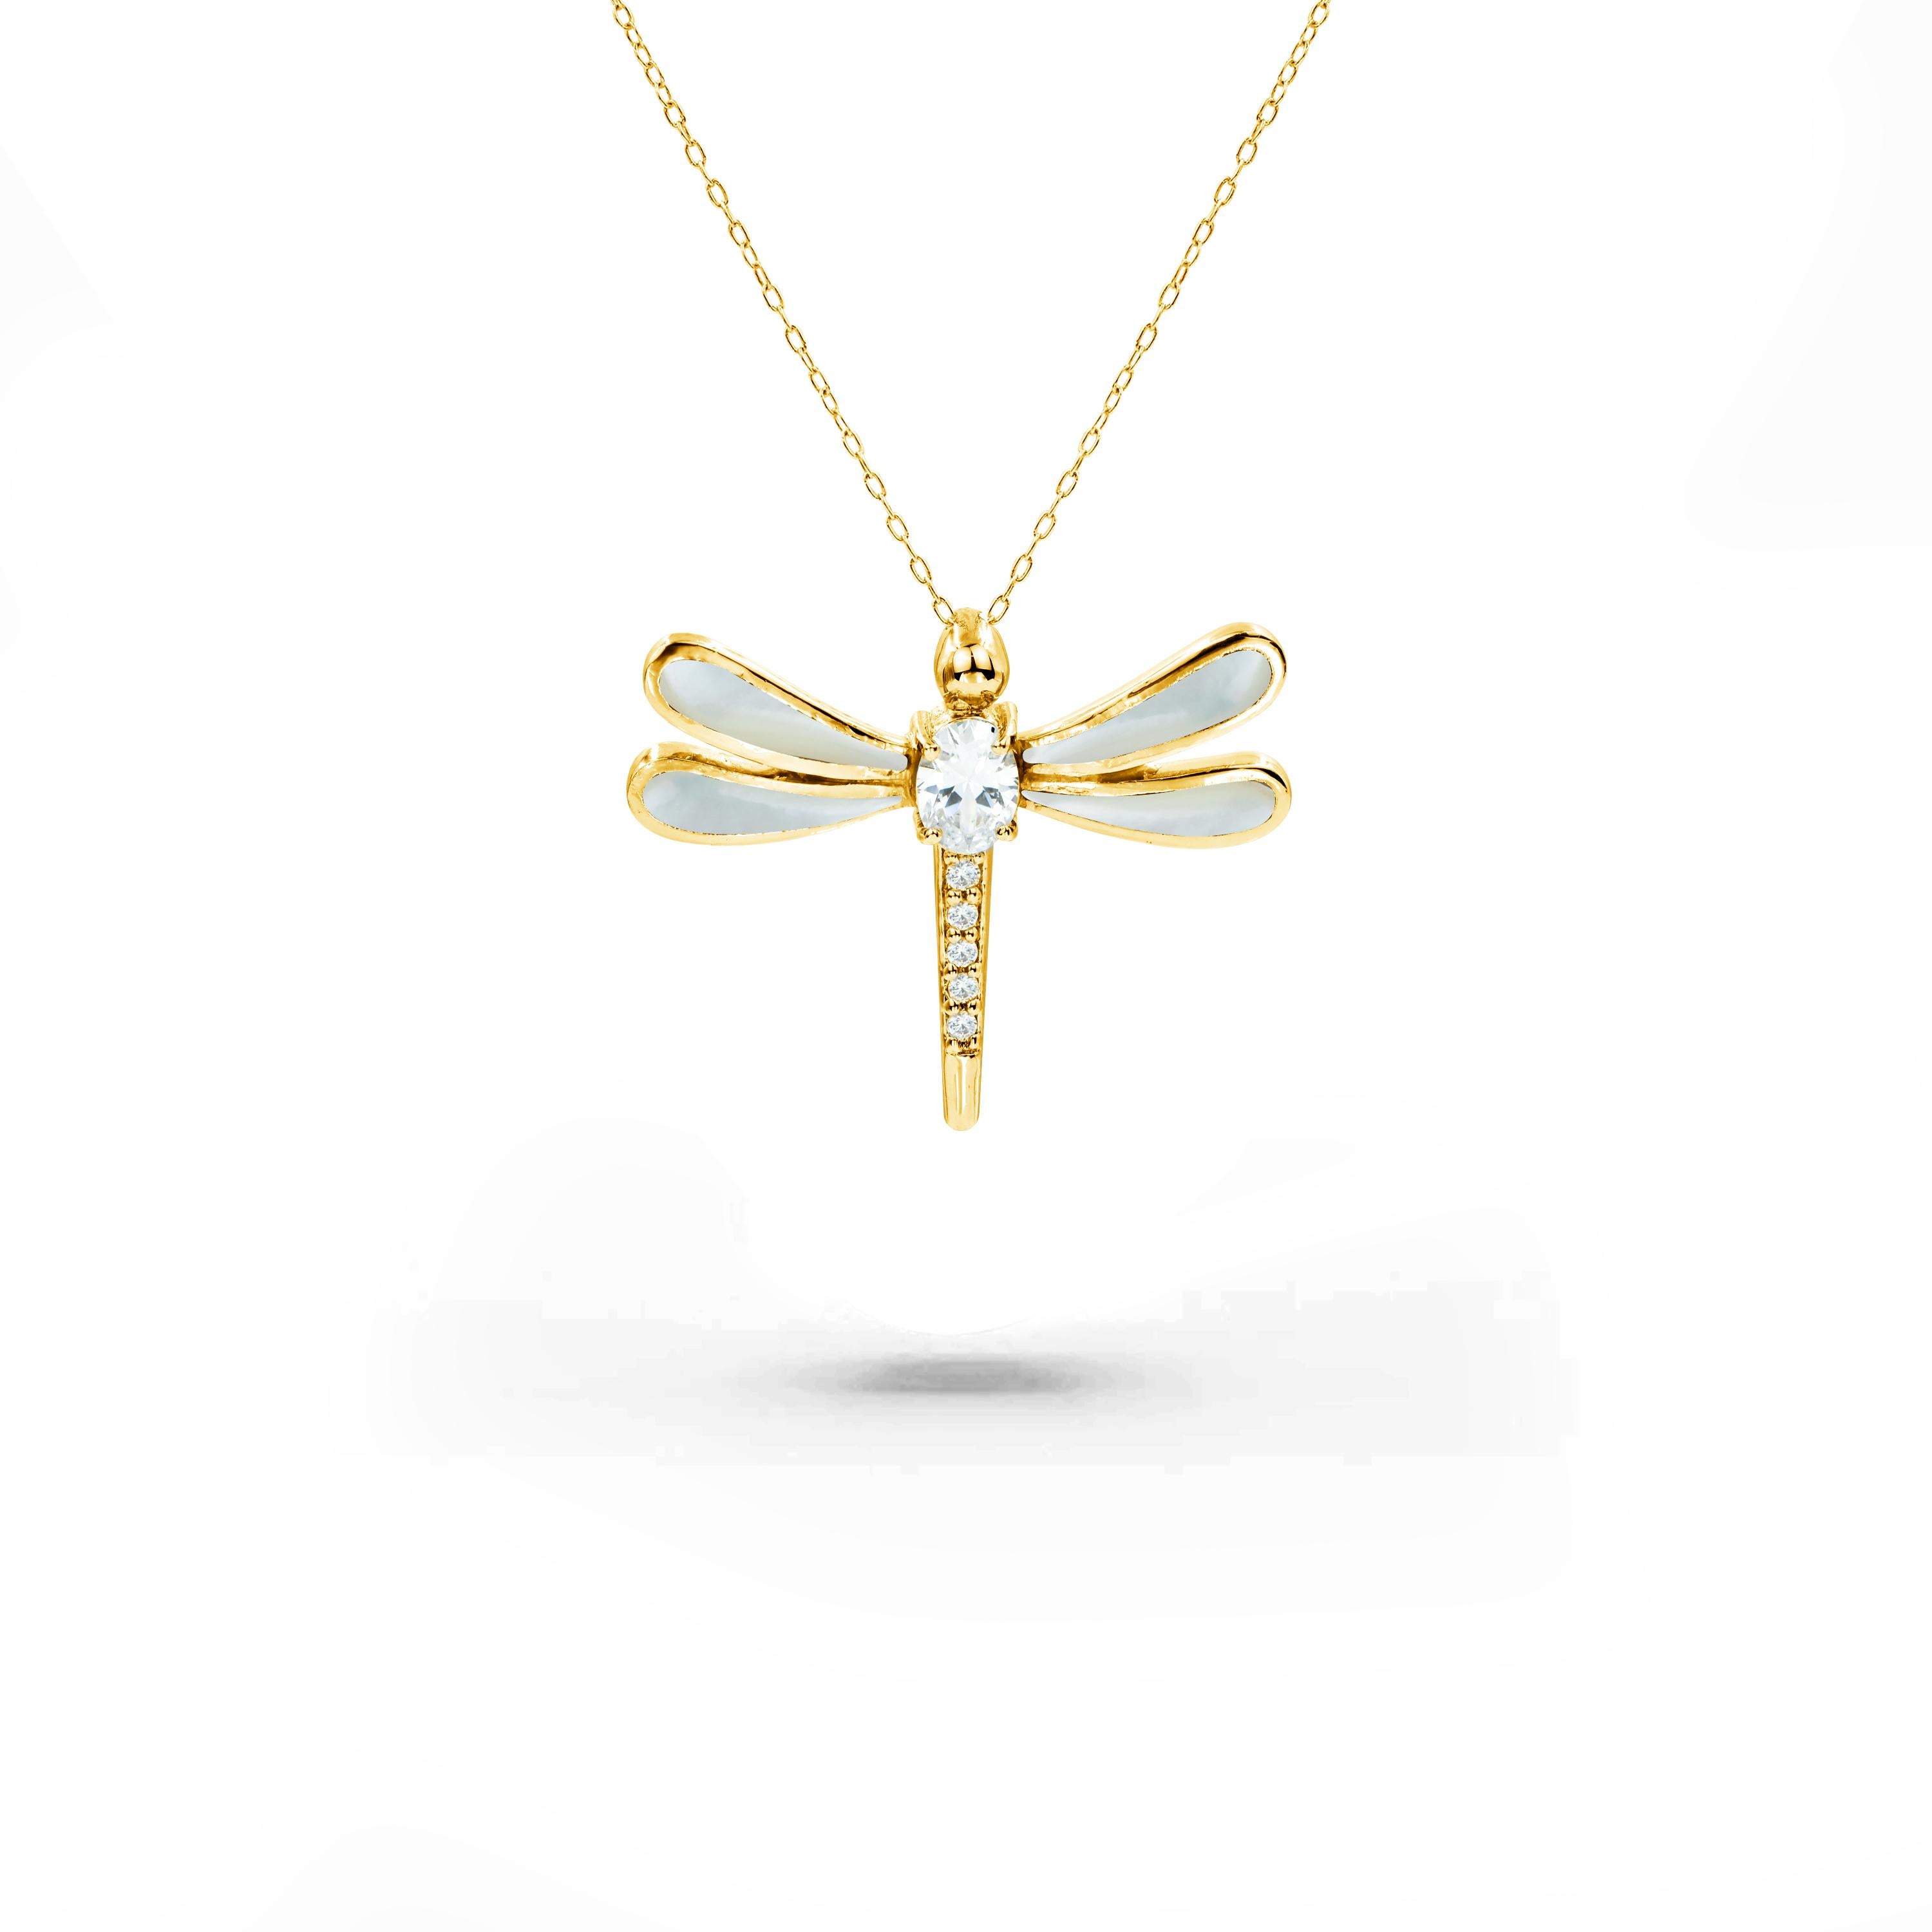 Our Gold Filled Mother of Pearl Dragonfly Necklace is more than just a piece of jewelry—it's a wearable work of art that celebrates the wonders of the natural world and the artistry of fine craftsmanship. Embrace the symbolism of the dragonfly's